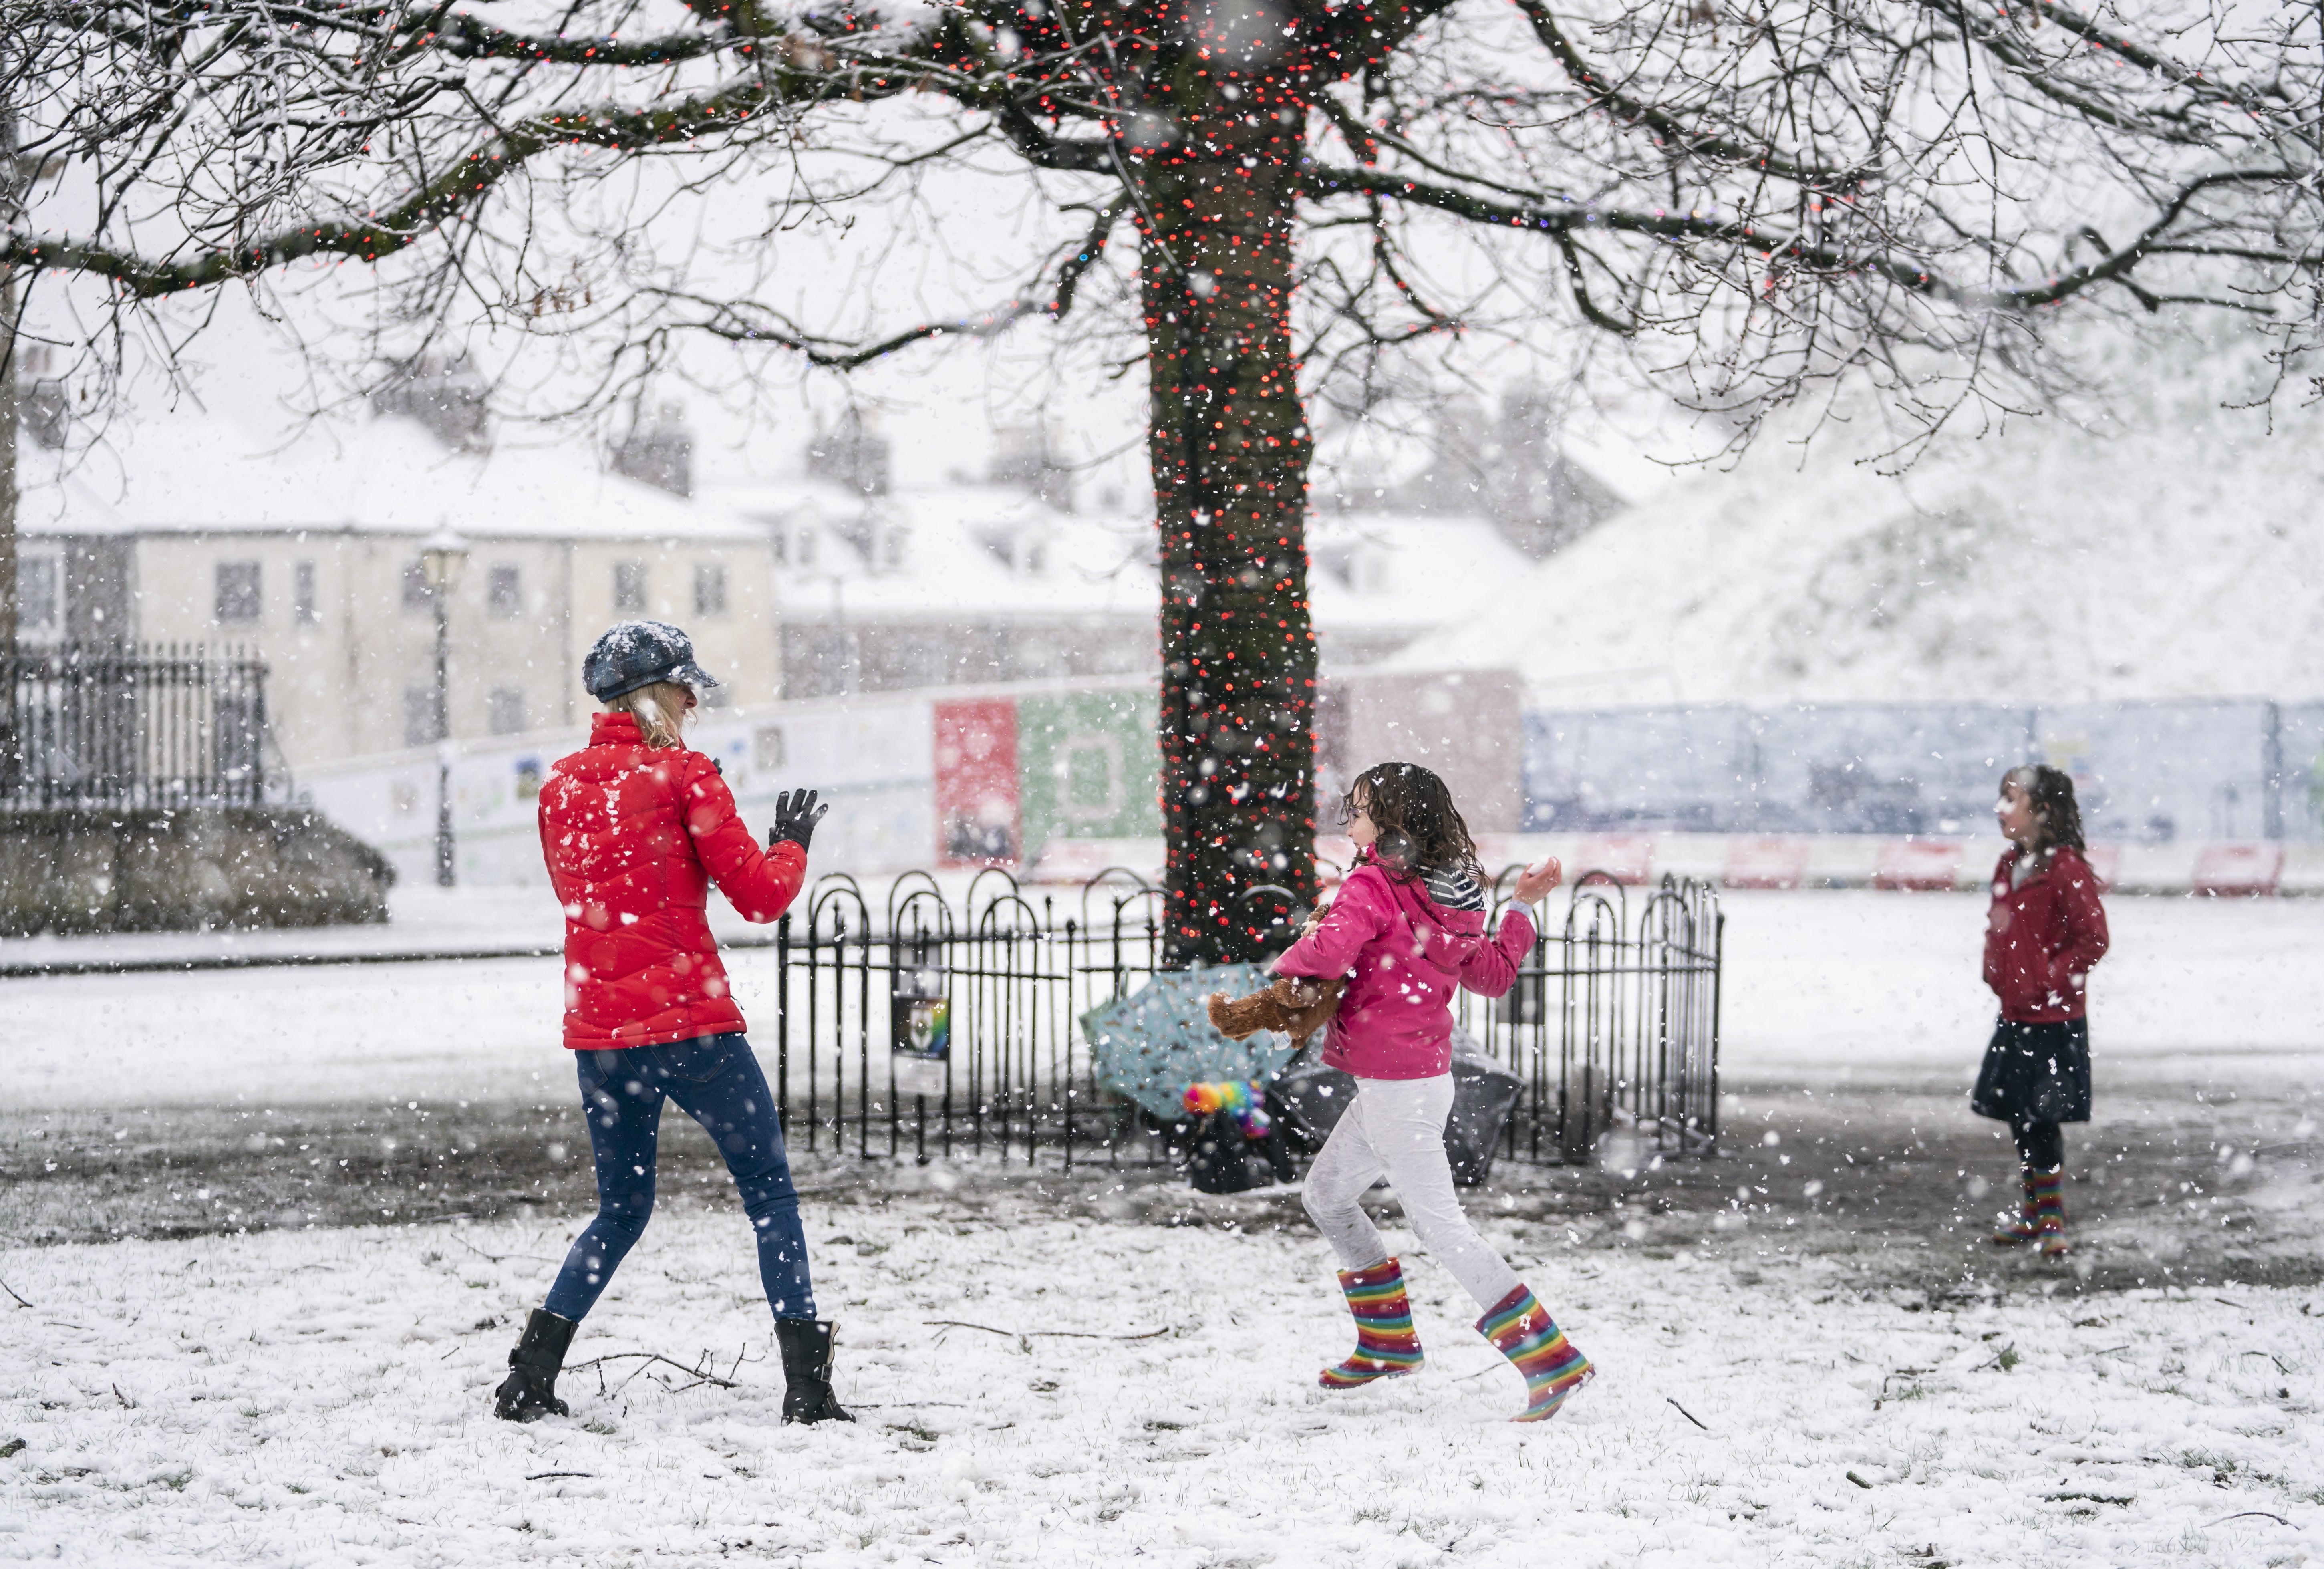 A snowball fight in action